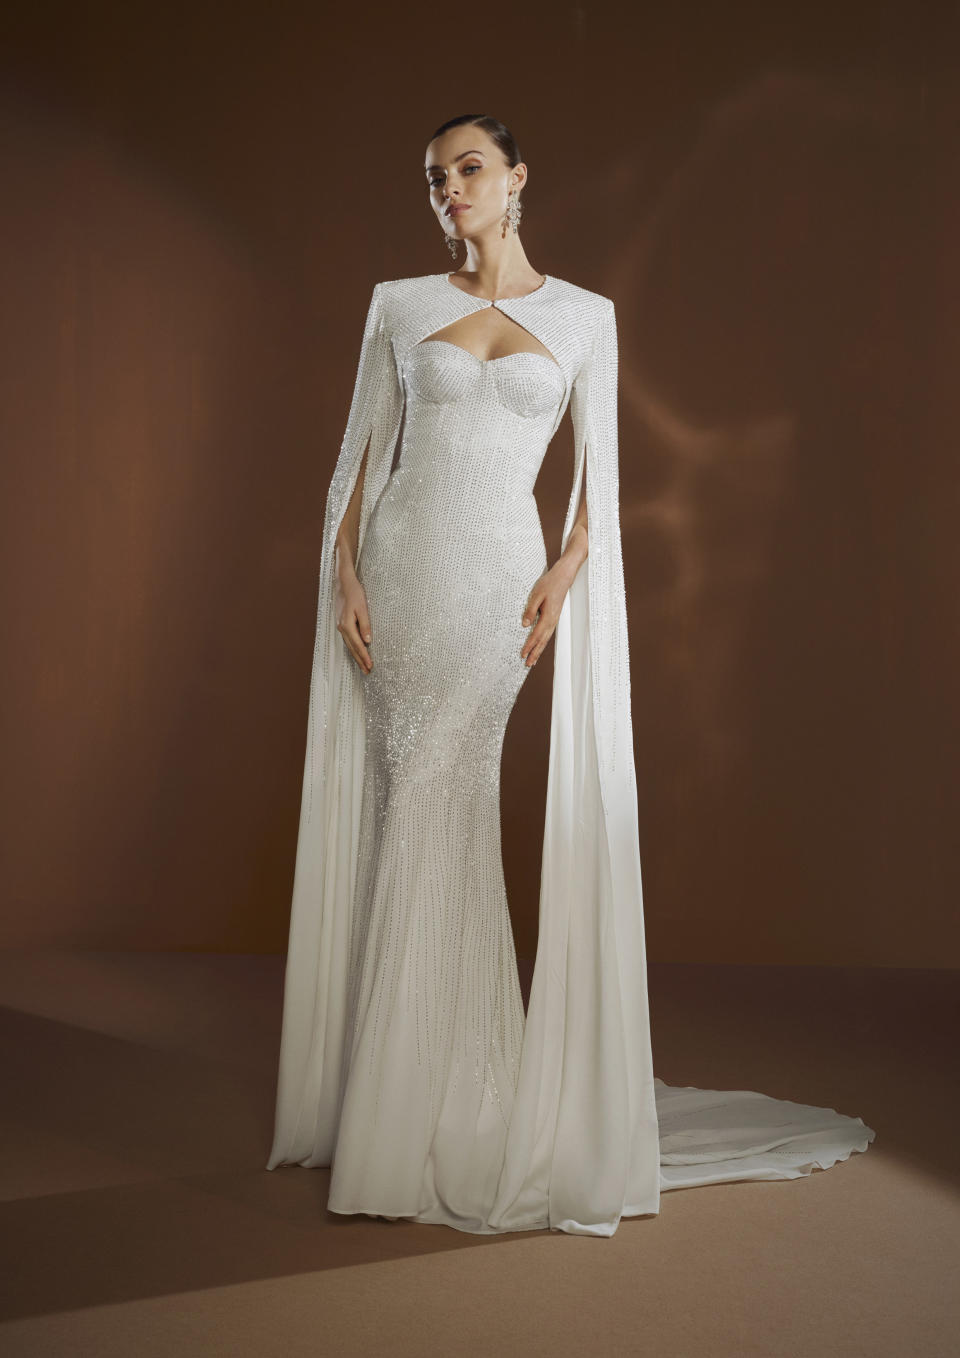 A look from the first Elisabetta Franchi collection with Pronovias.